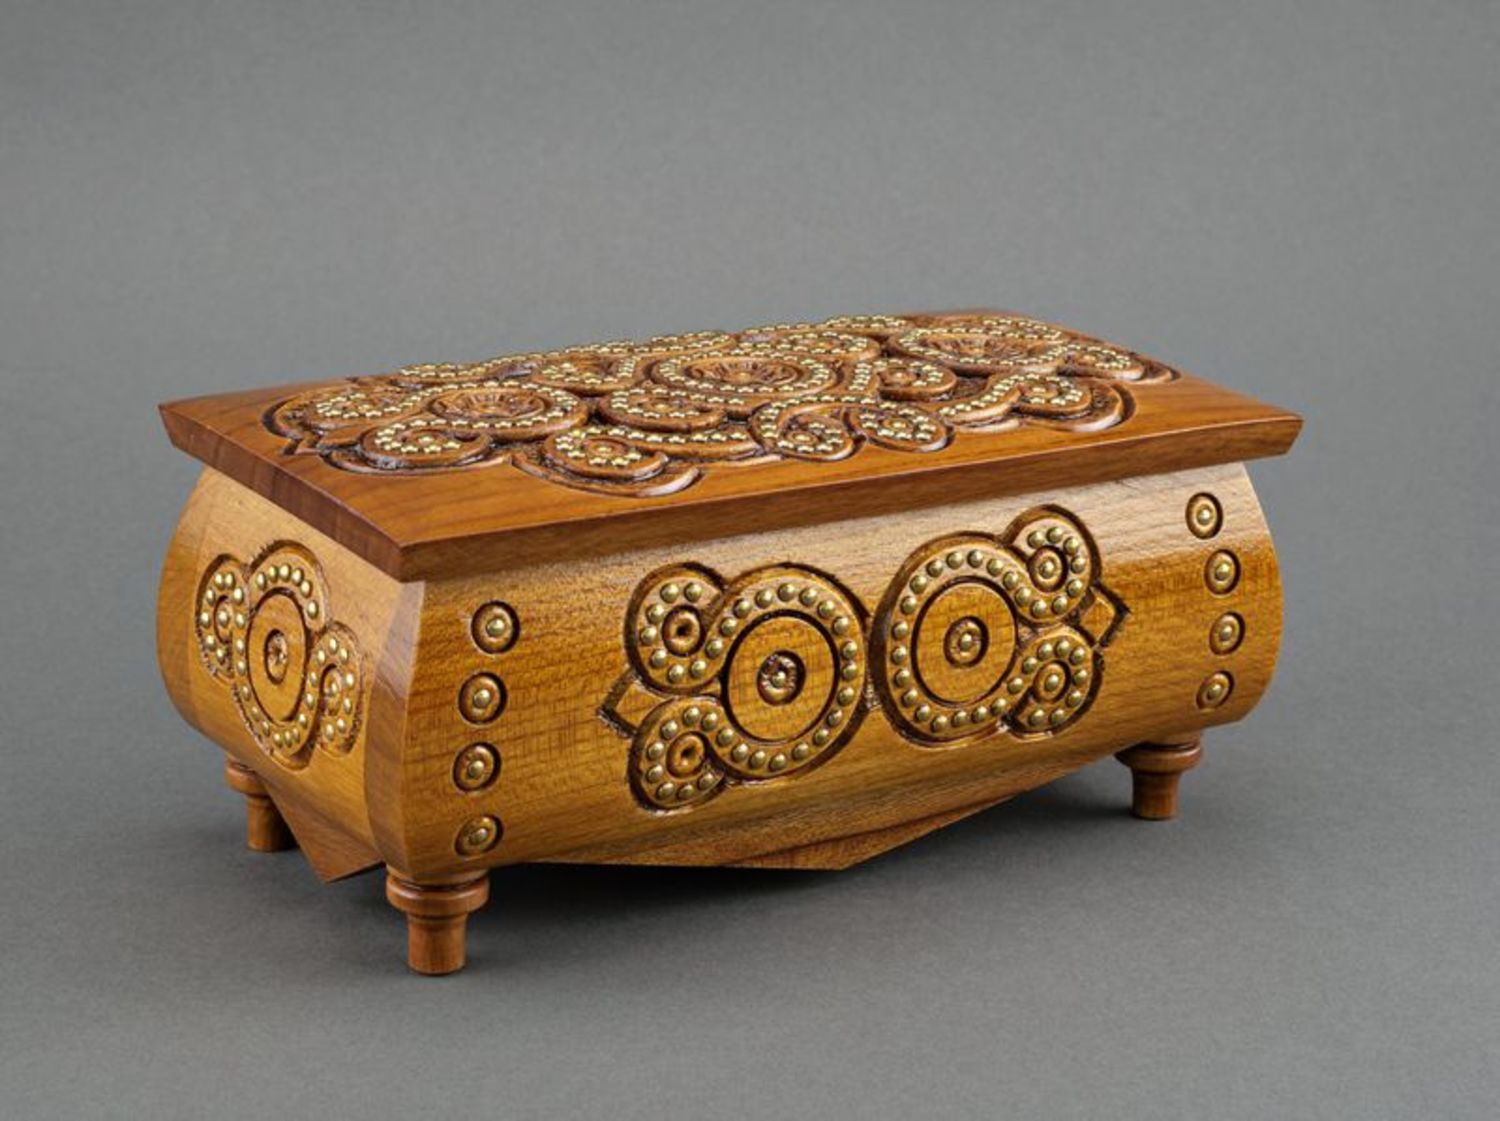 Handmade wooden carved box photo 3